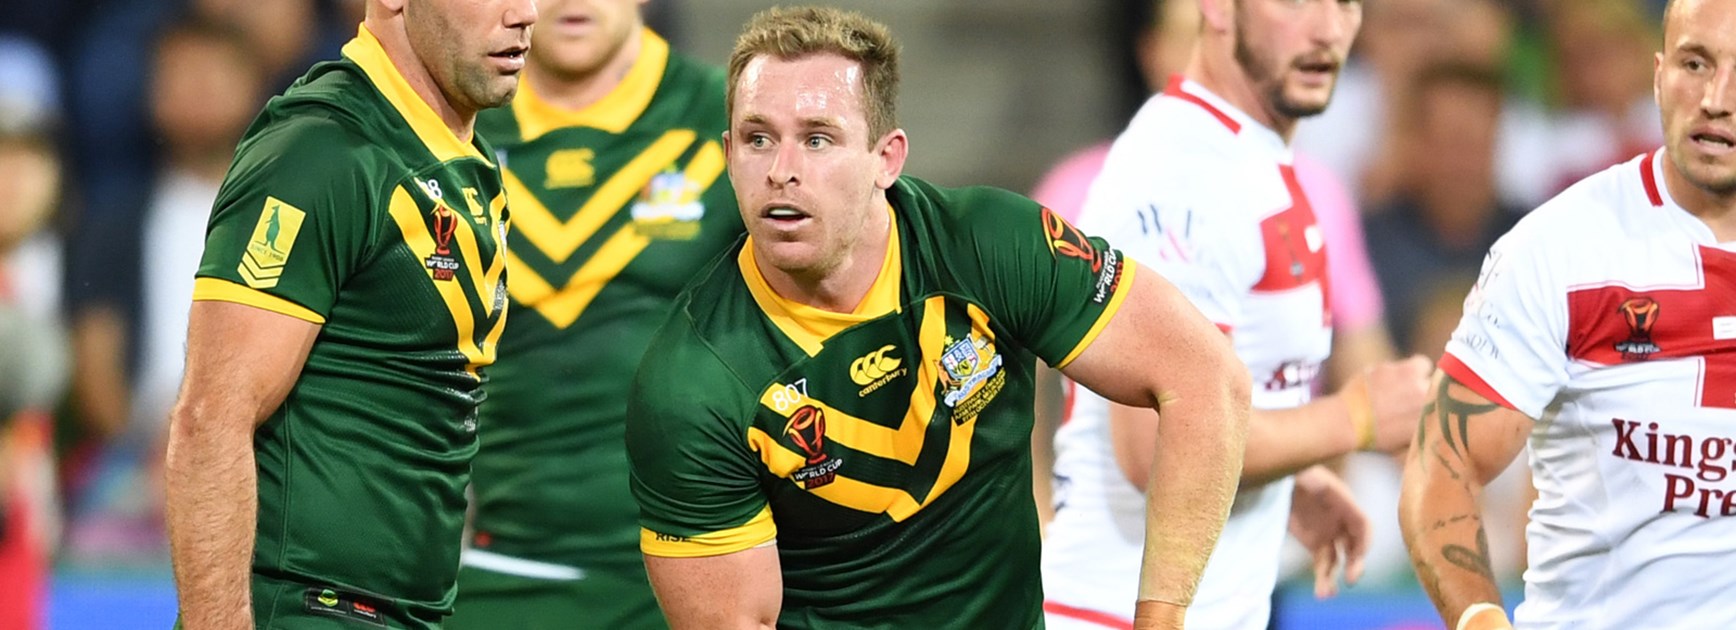 Morgan plays down long-term Roos role